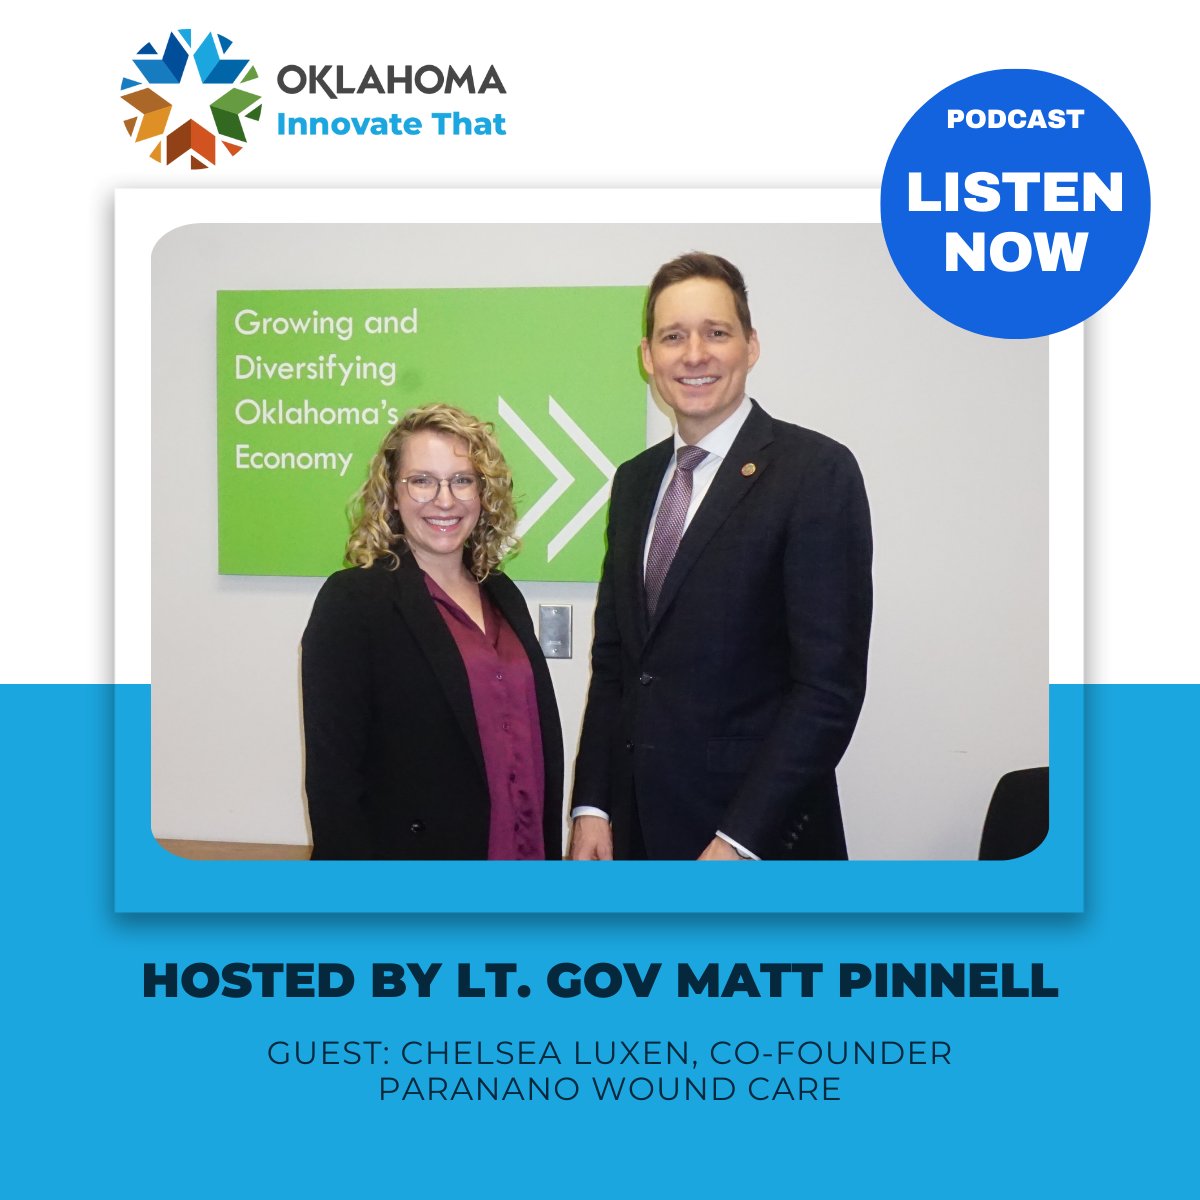 Listen to latest Podcast featuring ParaNano, revolutionizing wound care with smart bandage technology. Join @LtGovPinnell as he speaks with Chelsea Luxen, Co-Founder of ParaNano Wound Care, LLC, hear about wound management and infection detection. innovatethat.podbean.com/e/paranano-wou…